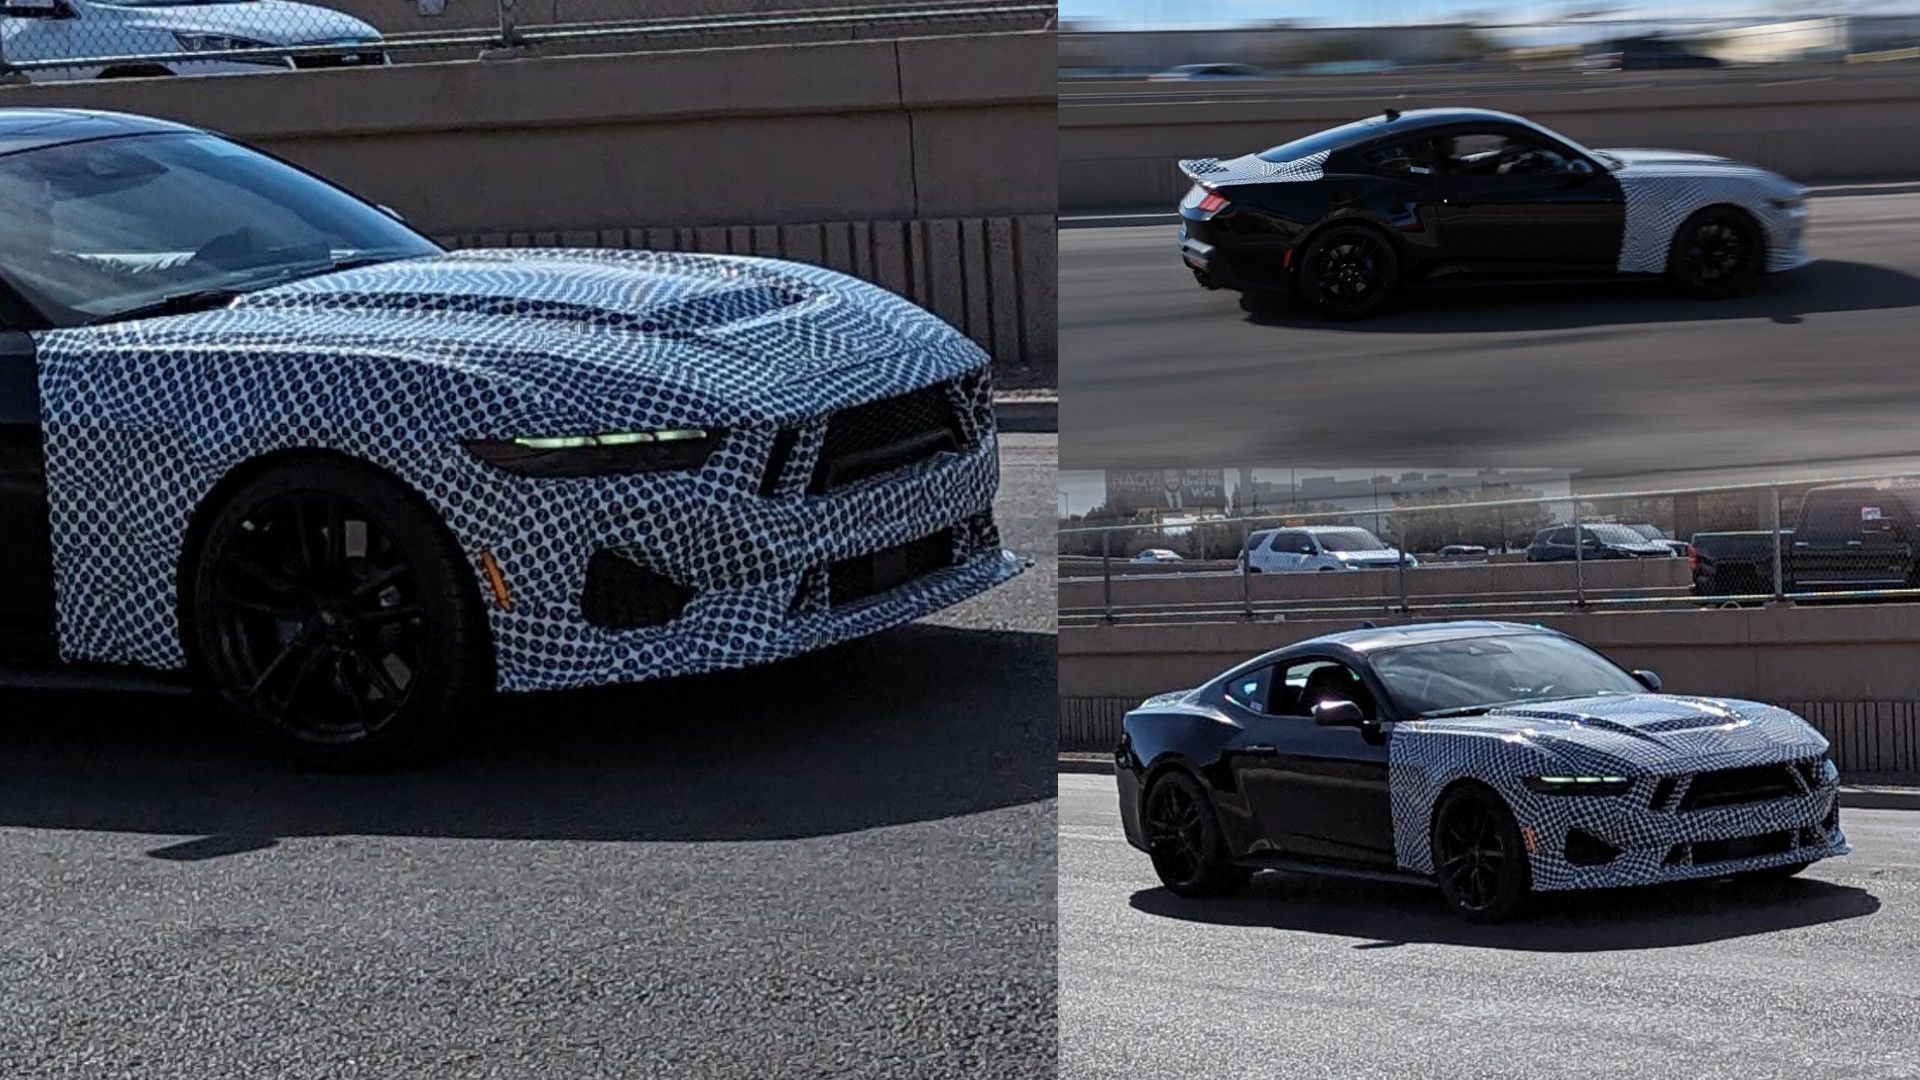 S650 Ford Mustang Shelby Spy Shot